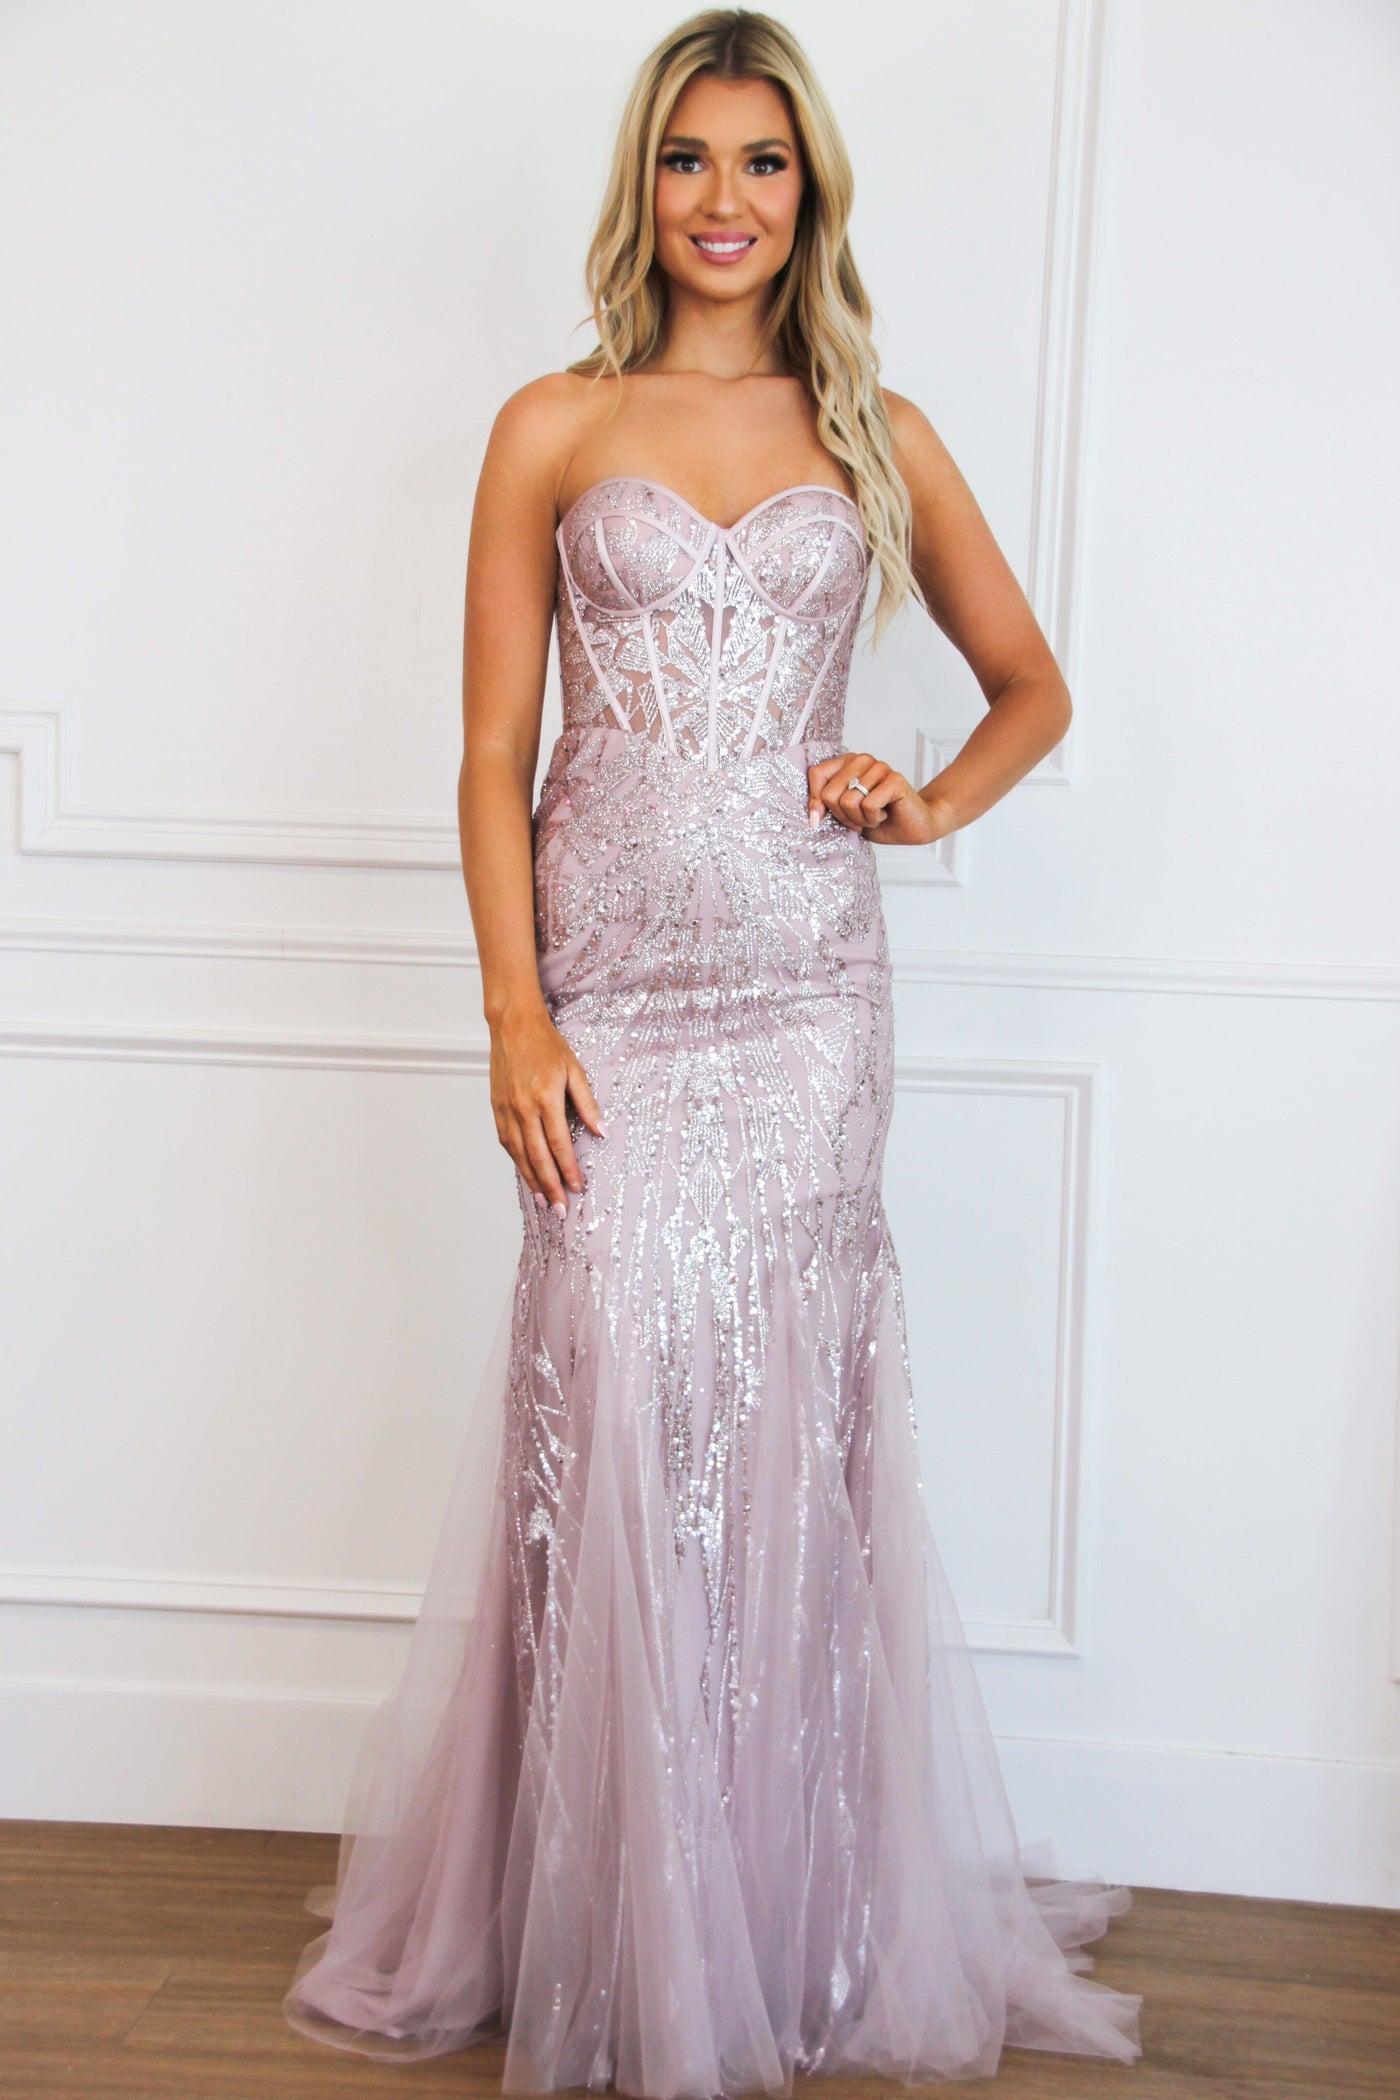 Athena Sparkly Bustier Mermaid Formal Dress: Mauve Rose - Bella and Bloom Boutique